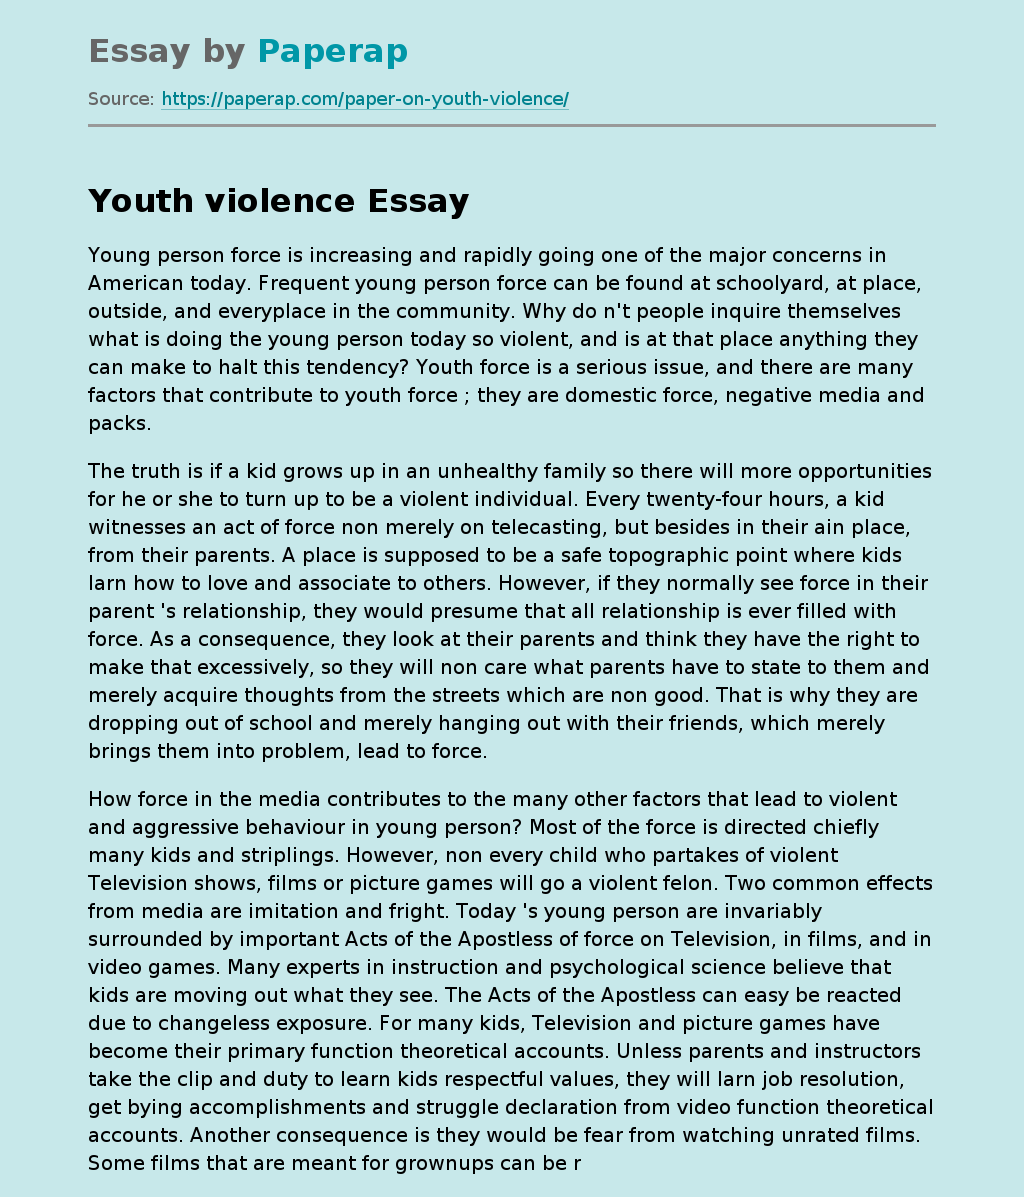 The Influence of the Media on Youth Violence